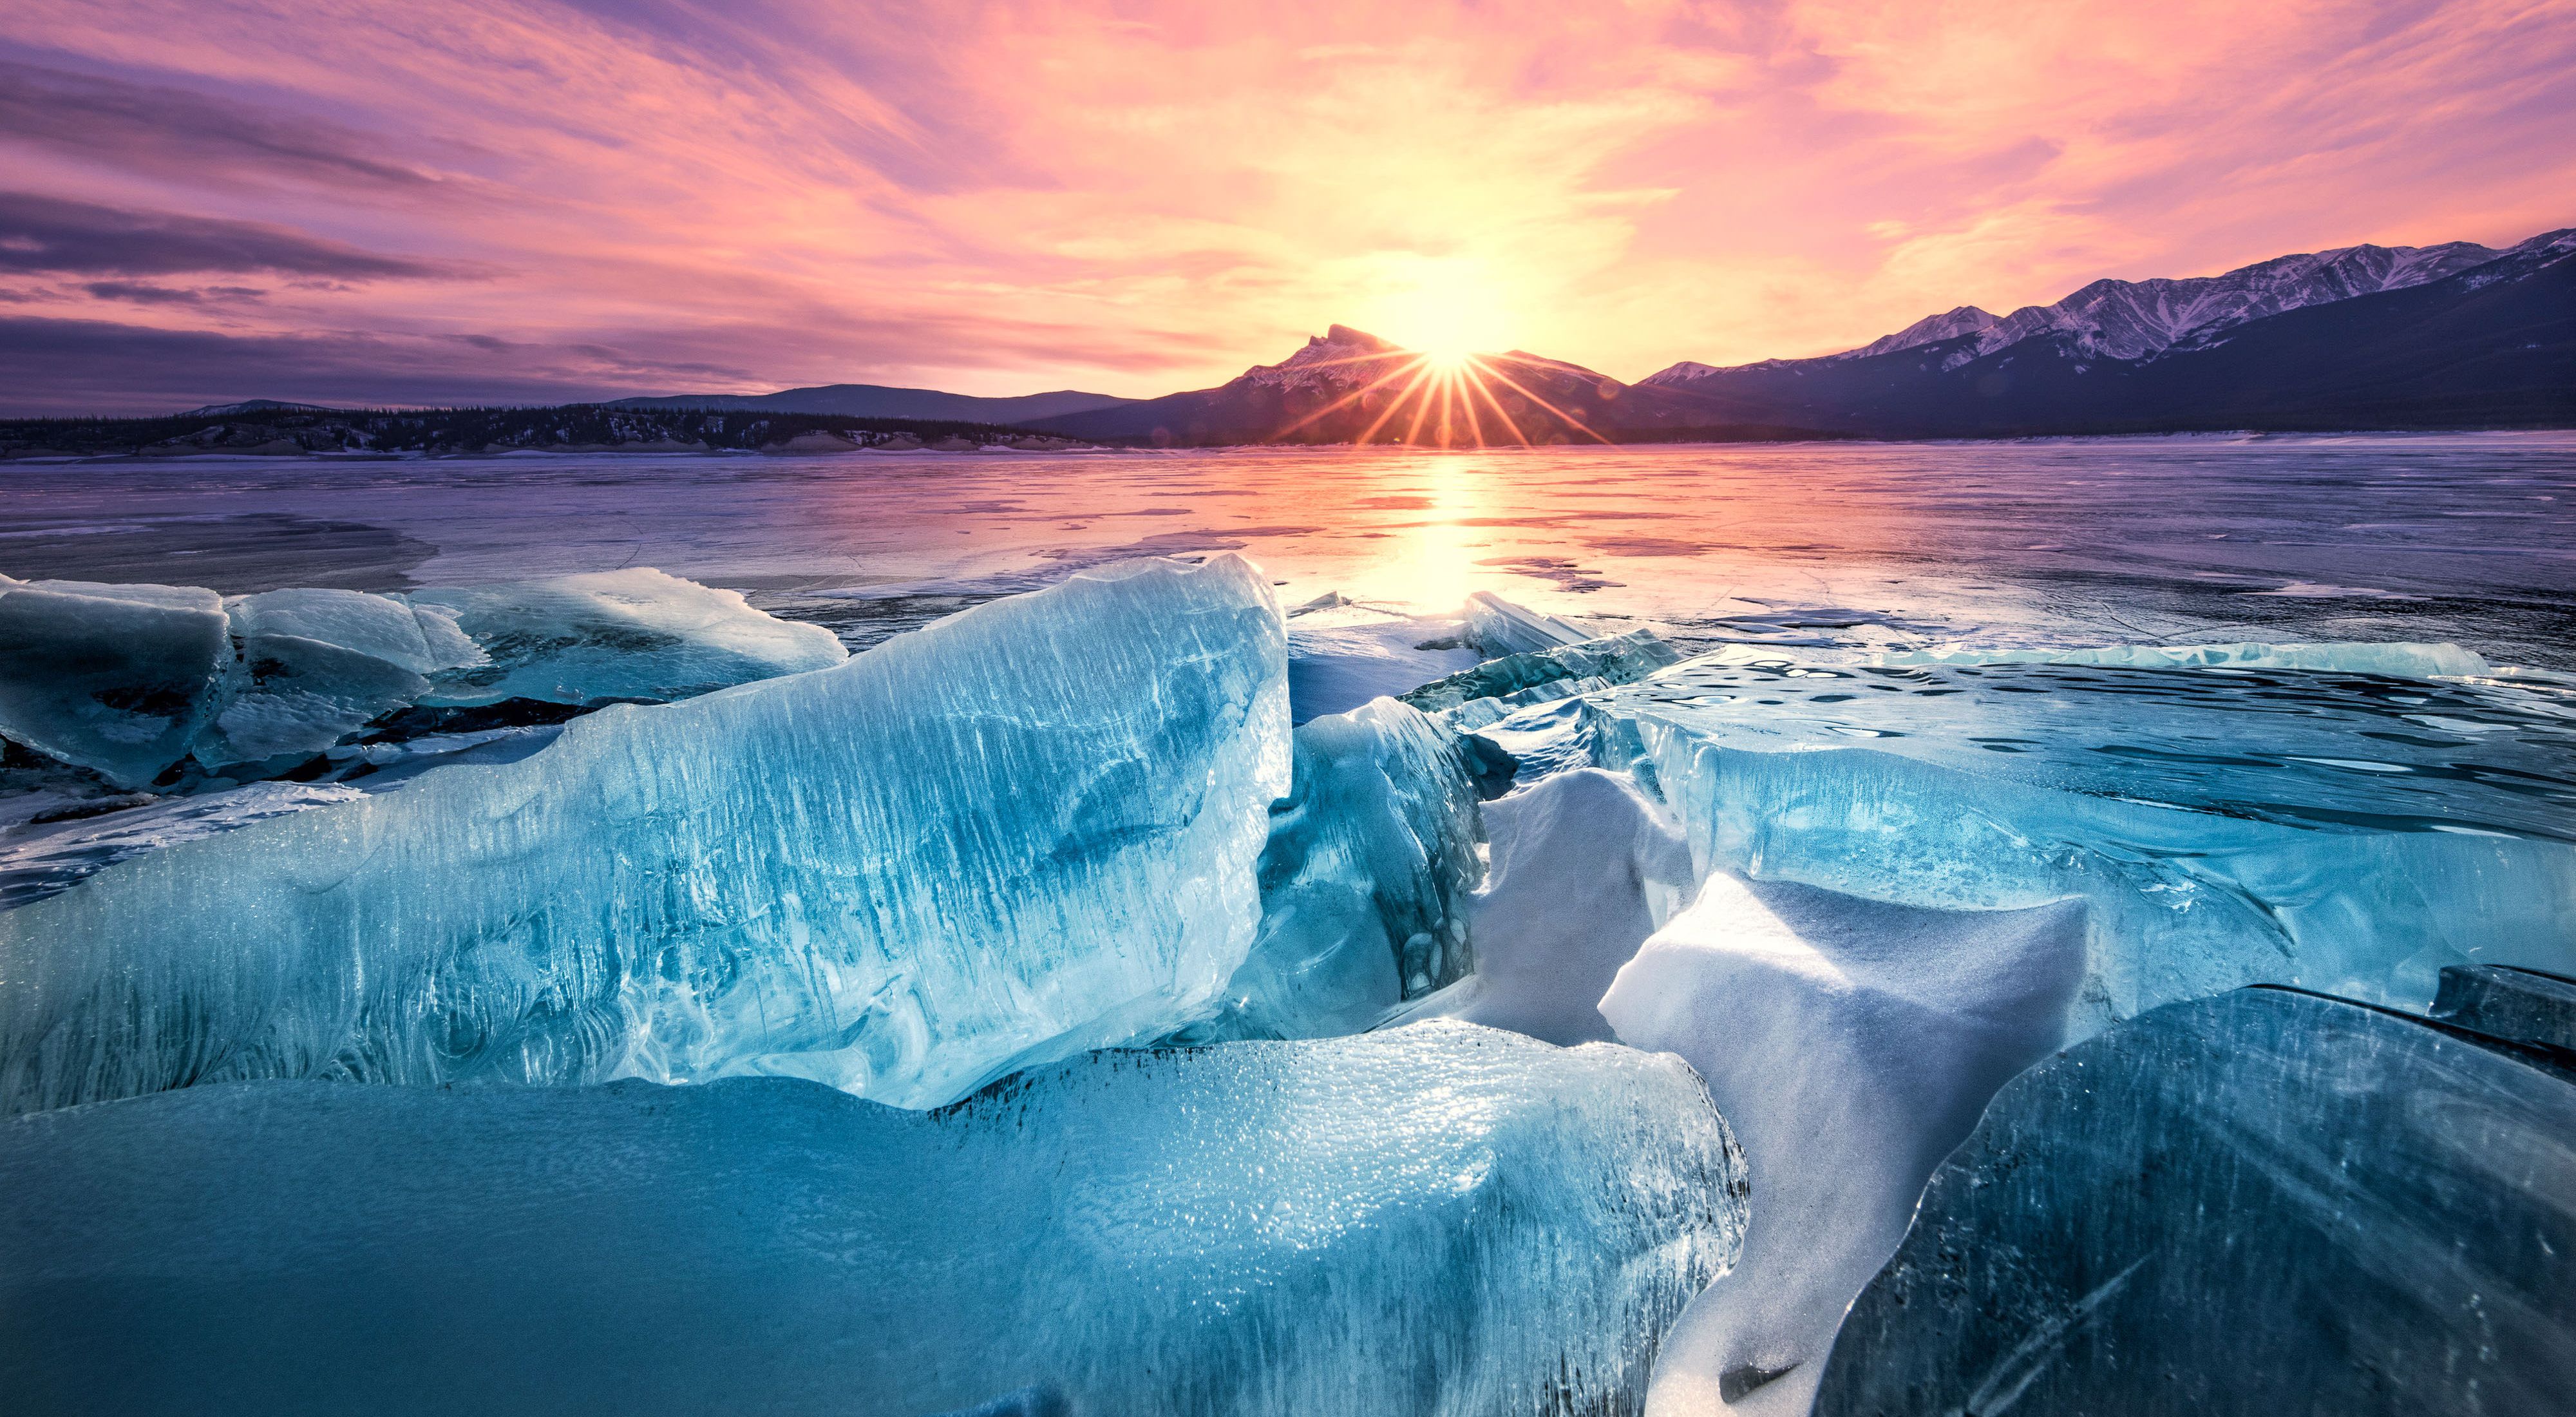 Massive ice blocks on a body of water with sun rising over mountains in the background.